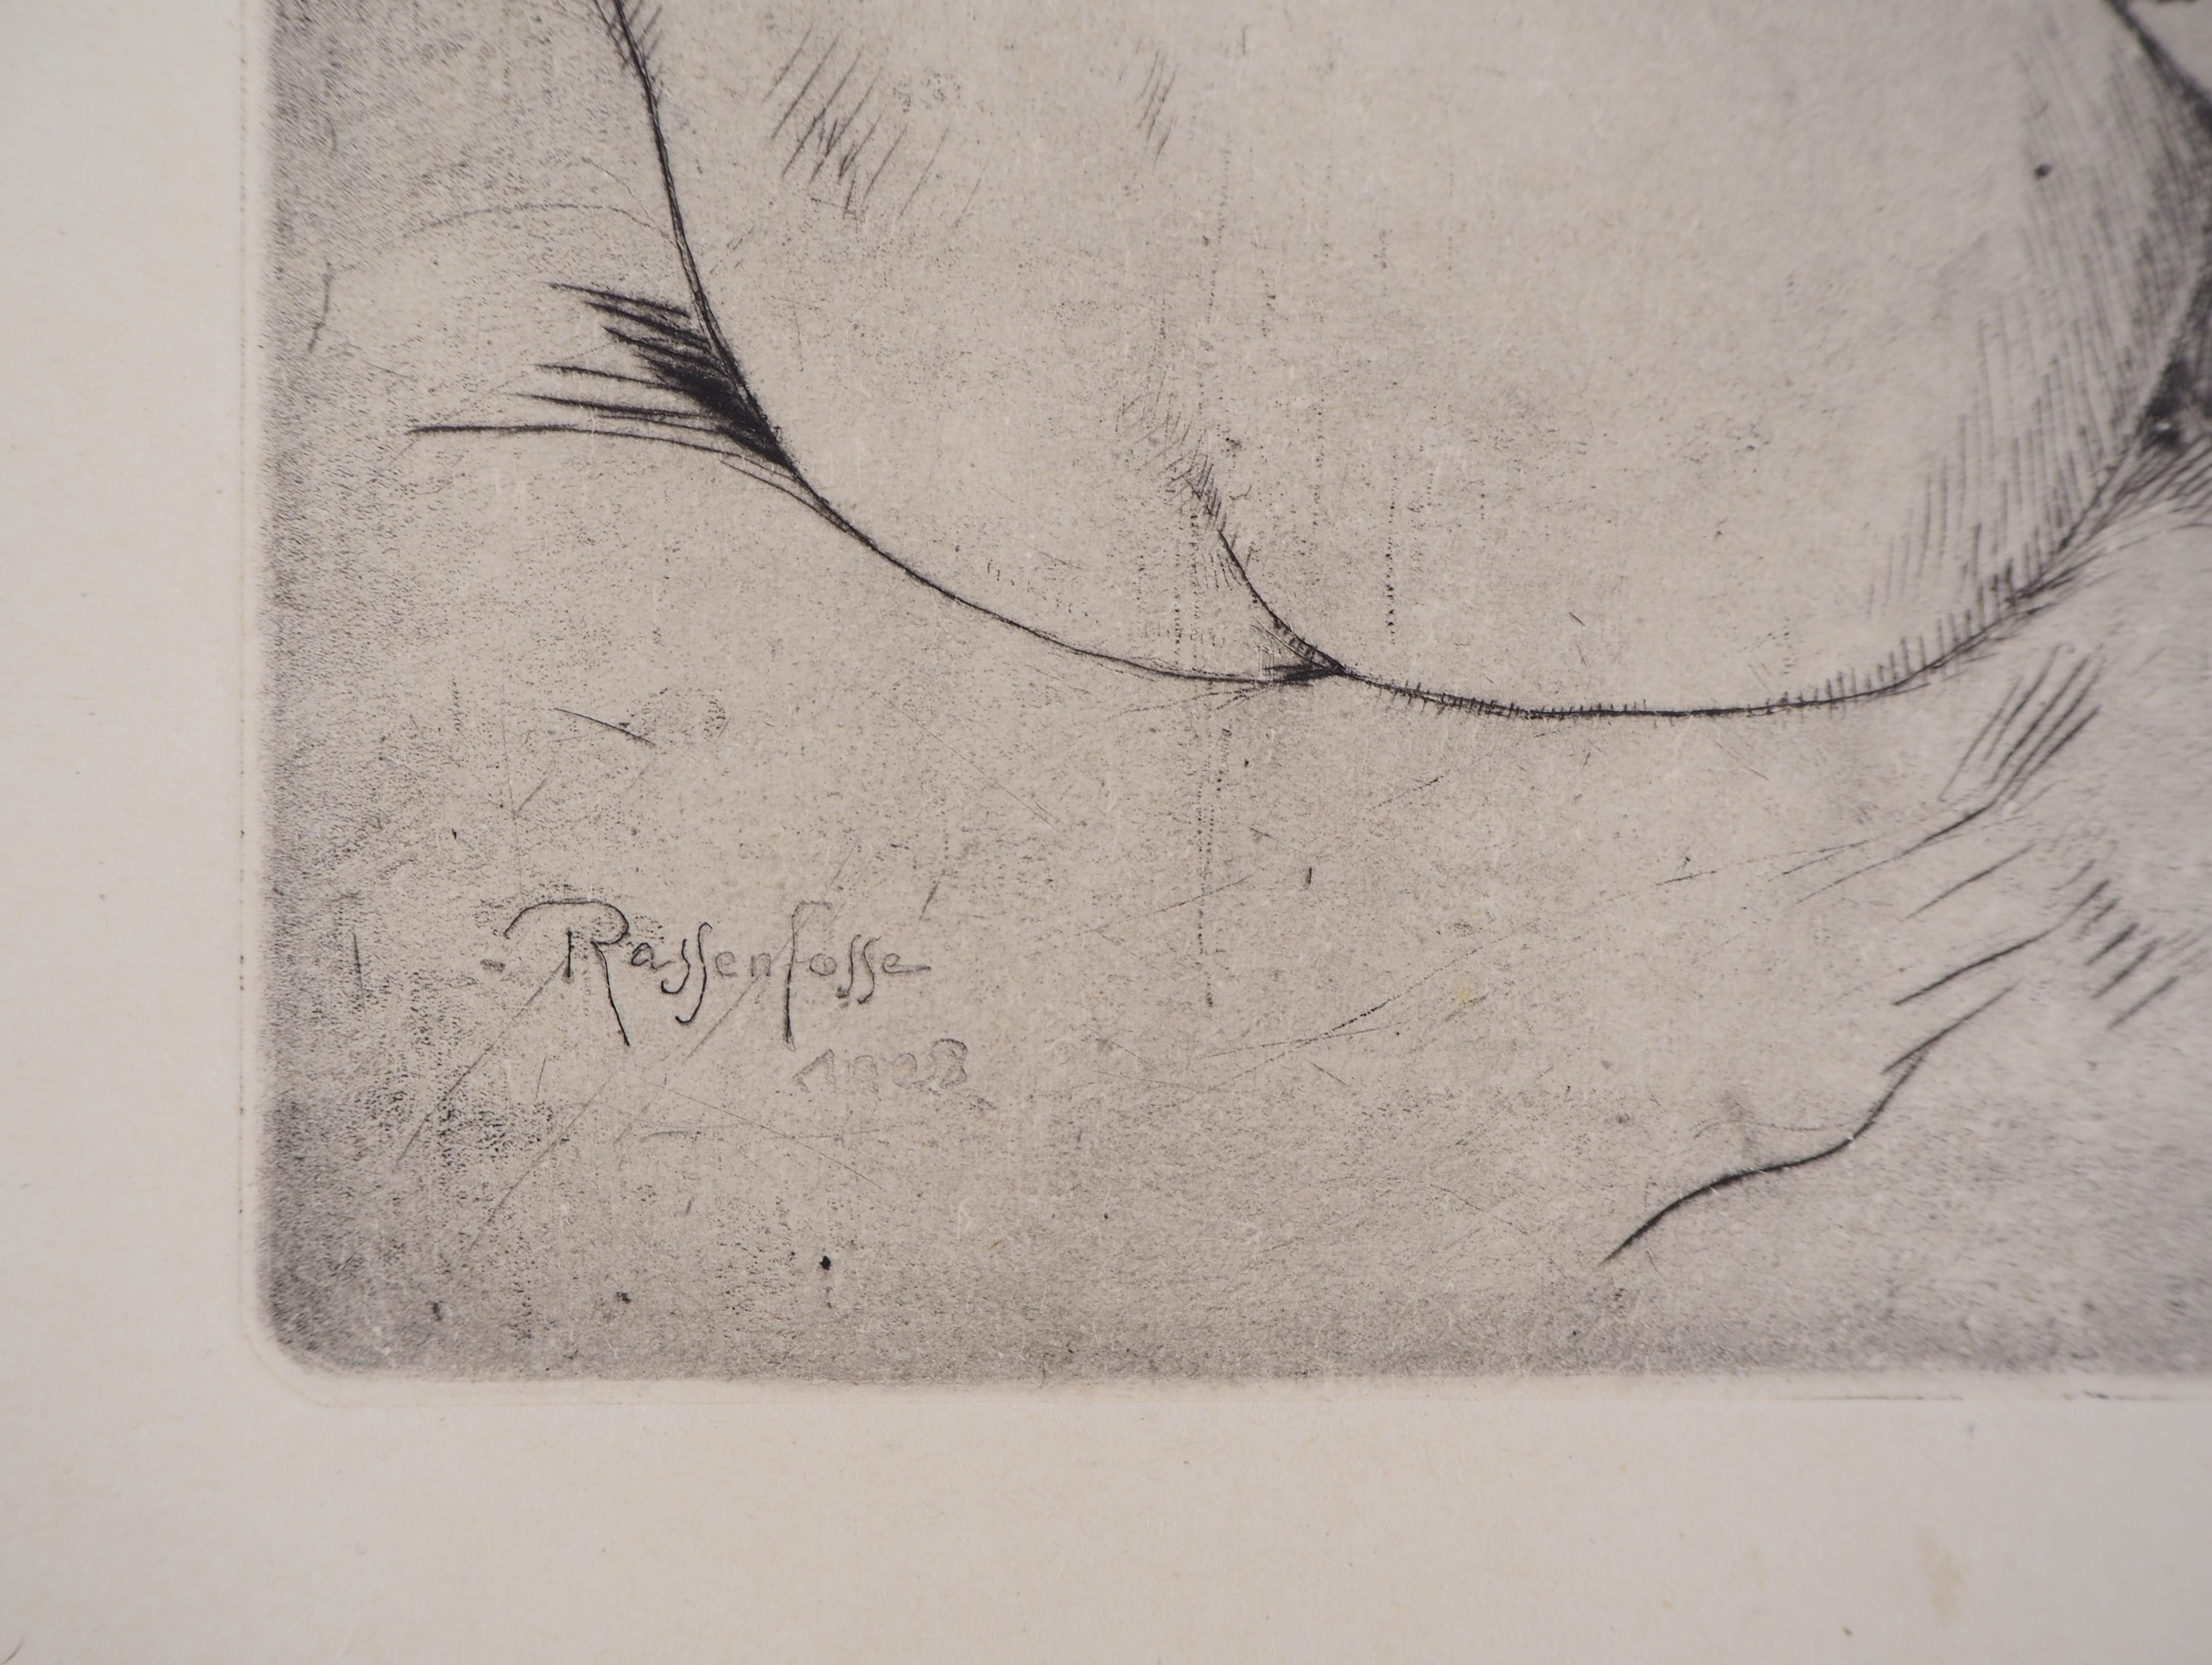 Nude with a Scarf - Original drypoint etching, Handsigned, 1928 - Brown Figurative Print by Armand Rassenfosse